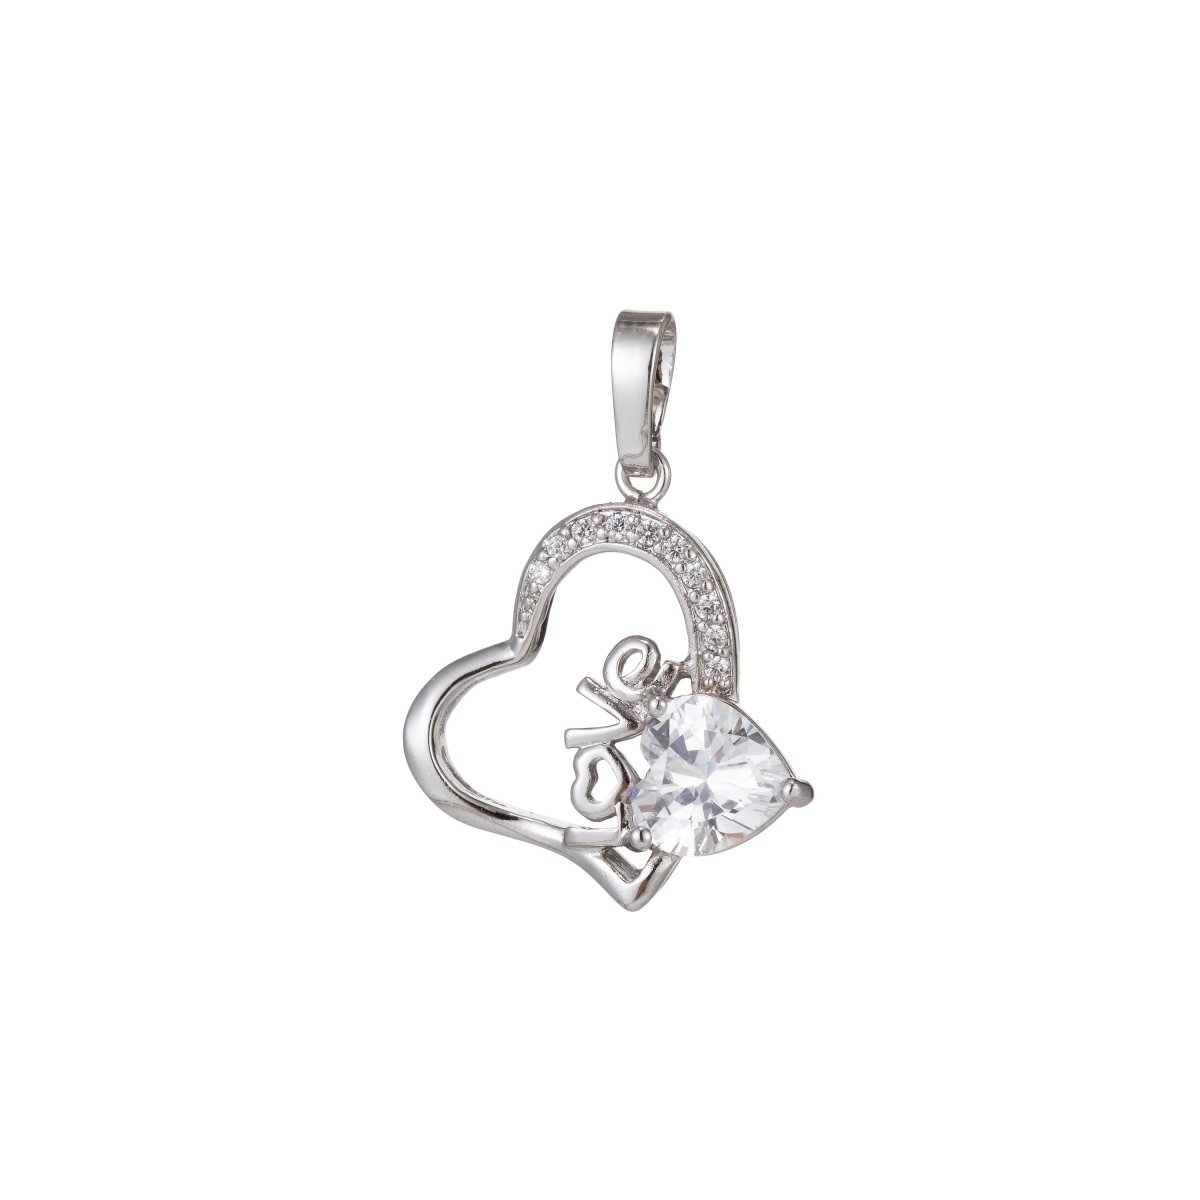 White Gold Filled Micro Pave CZ Love Heart Pendant Charm, Heart Micro Pave CZ Pendant Charm, White Gold Filled Pendant, For DIY Jewelry I-383 - DLUXCA